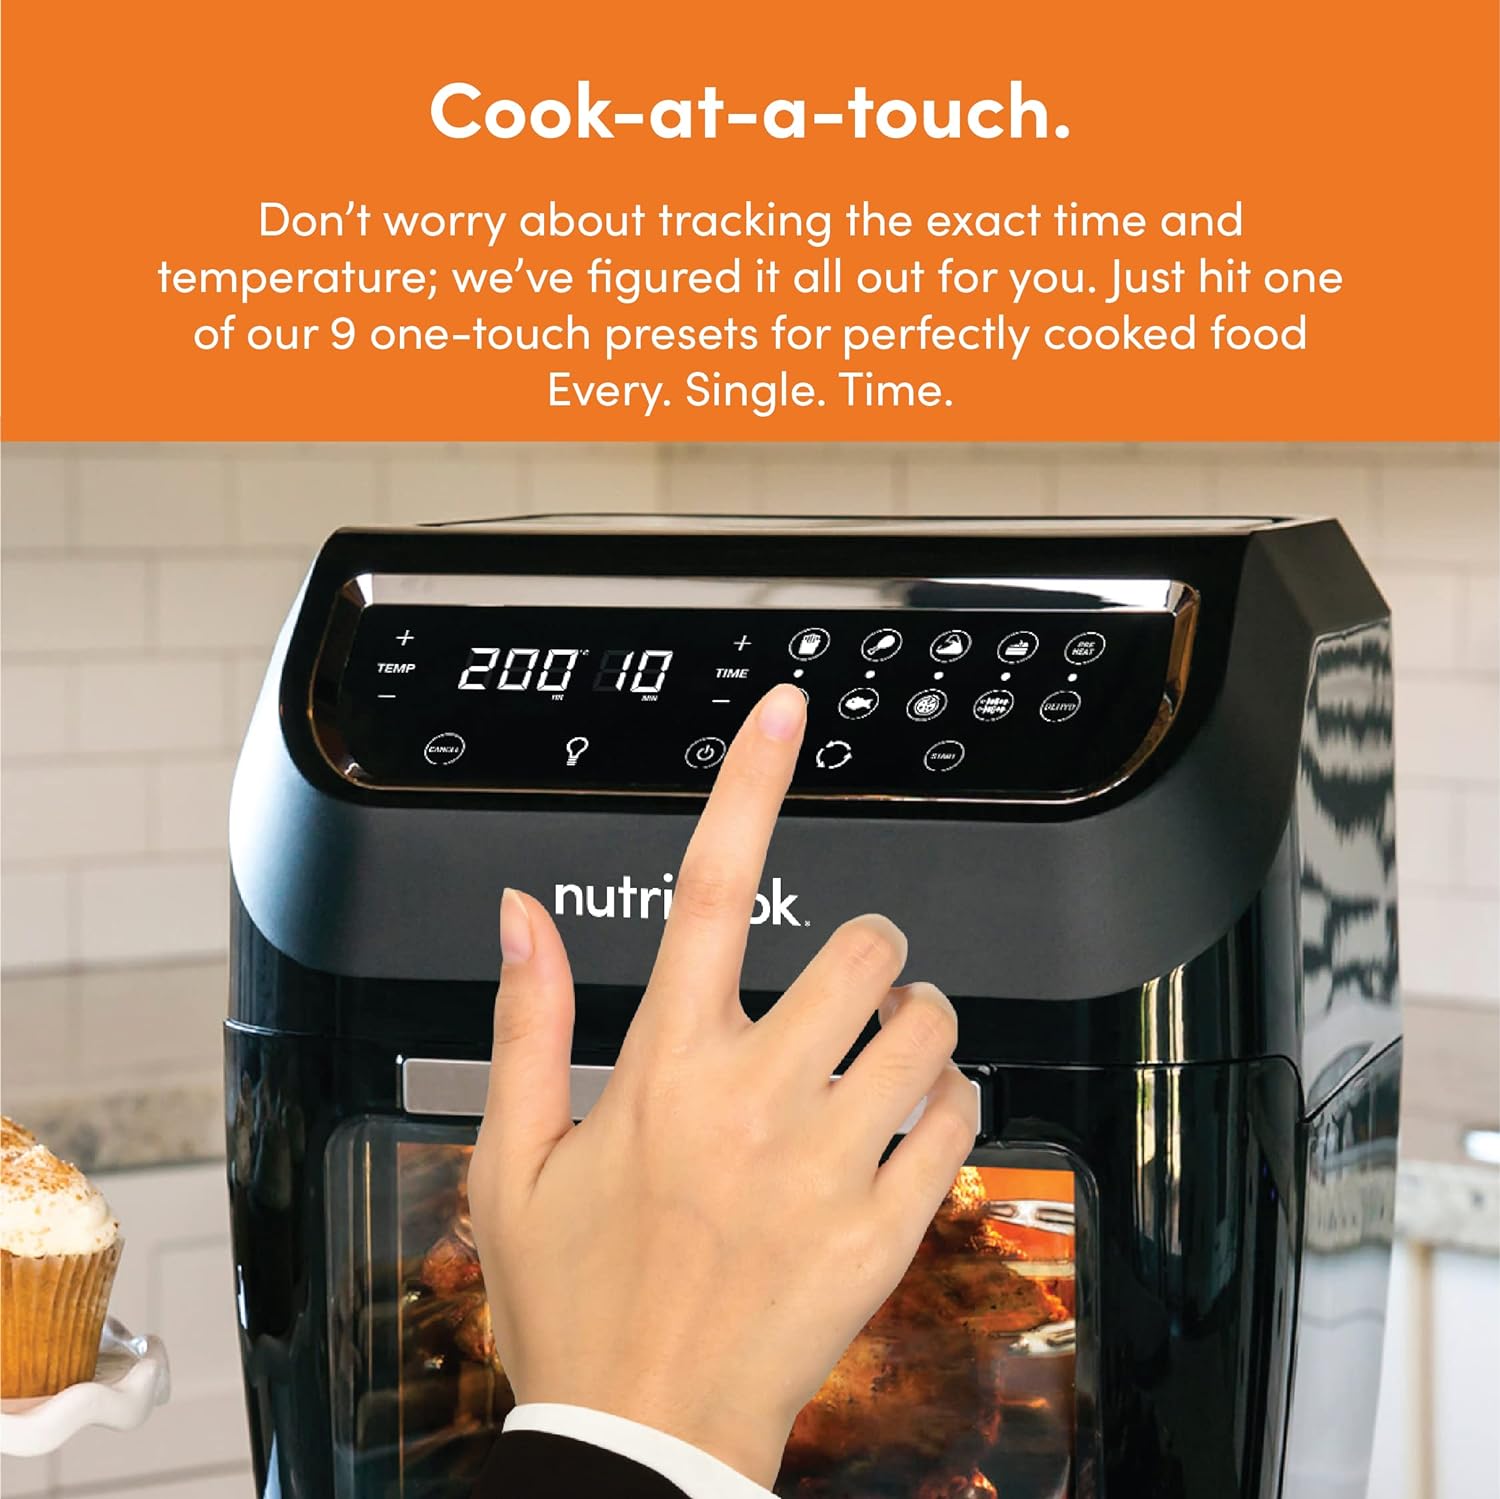 Nutricook Airfryer Oven 12L / Digital One Touch Control Panel Display - Black